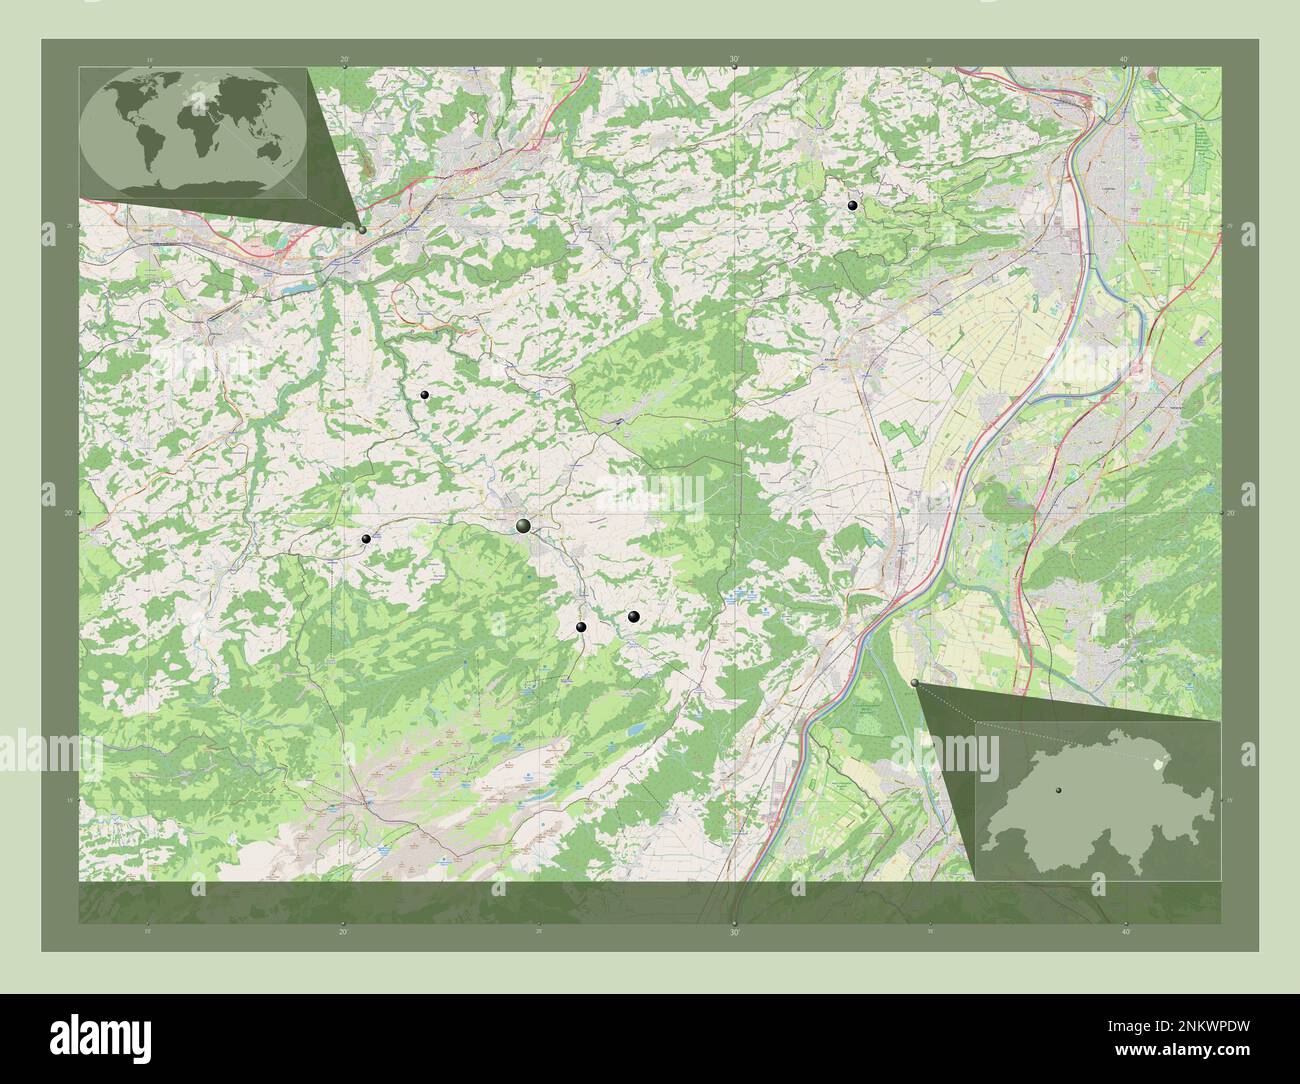 Appenzell Innerrhoden, canton of Switzerland. Open Street Map. Locations of major cities of the region. Corner auxiliary location maps Stock Photo